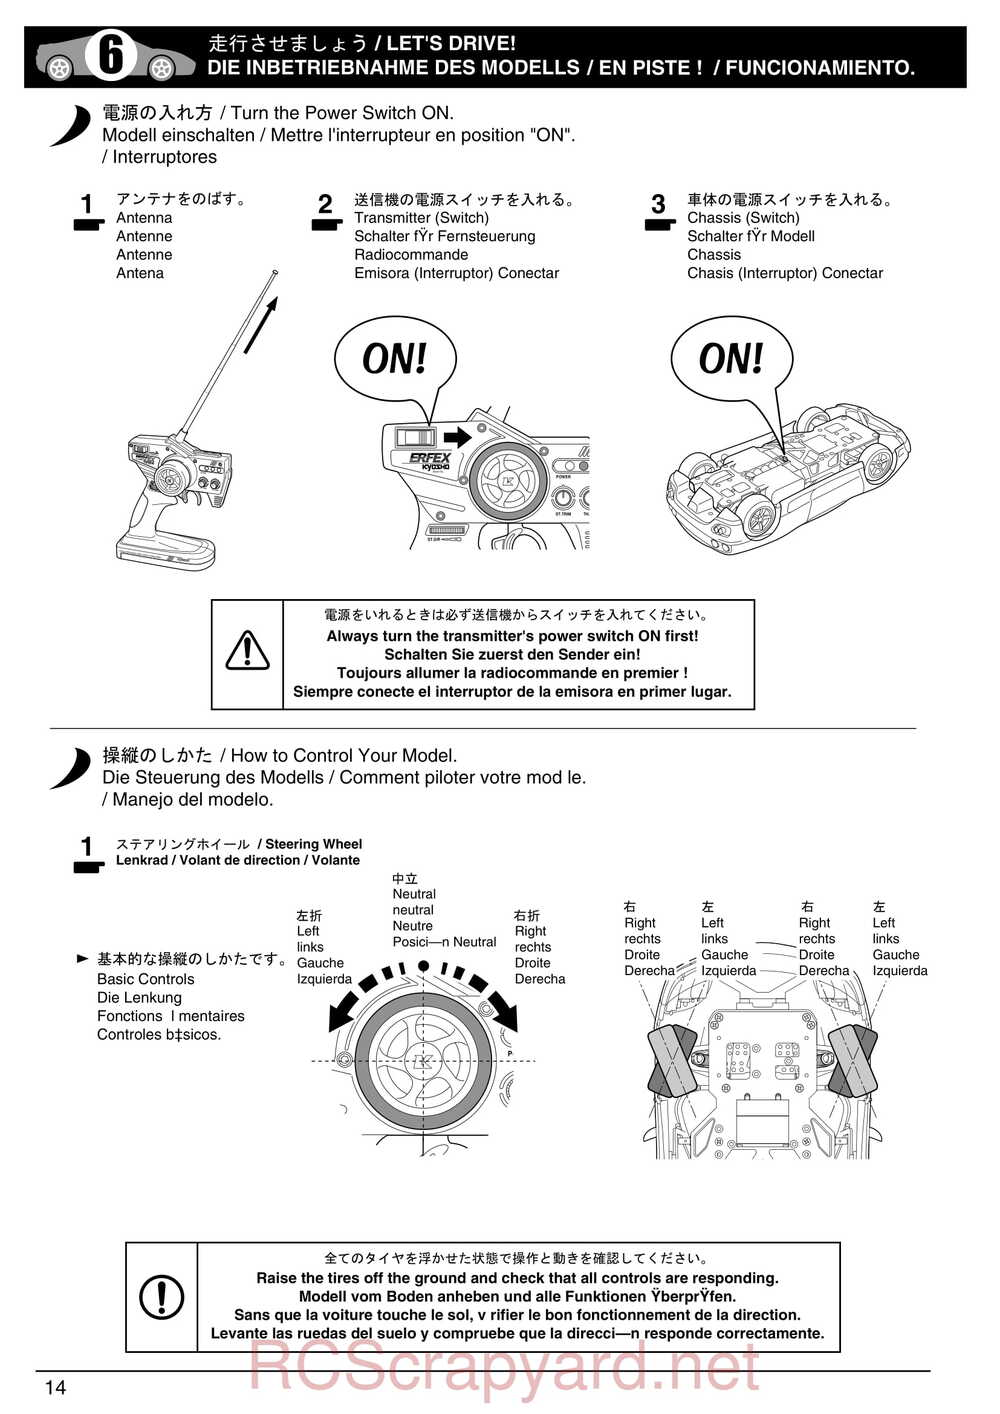 Kyosho - 30551 - a12 Sport - Manual - Page 14